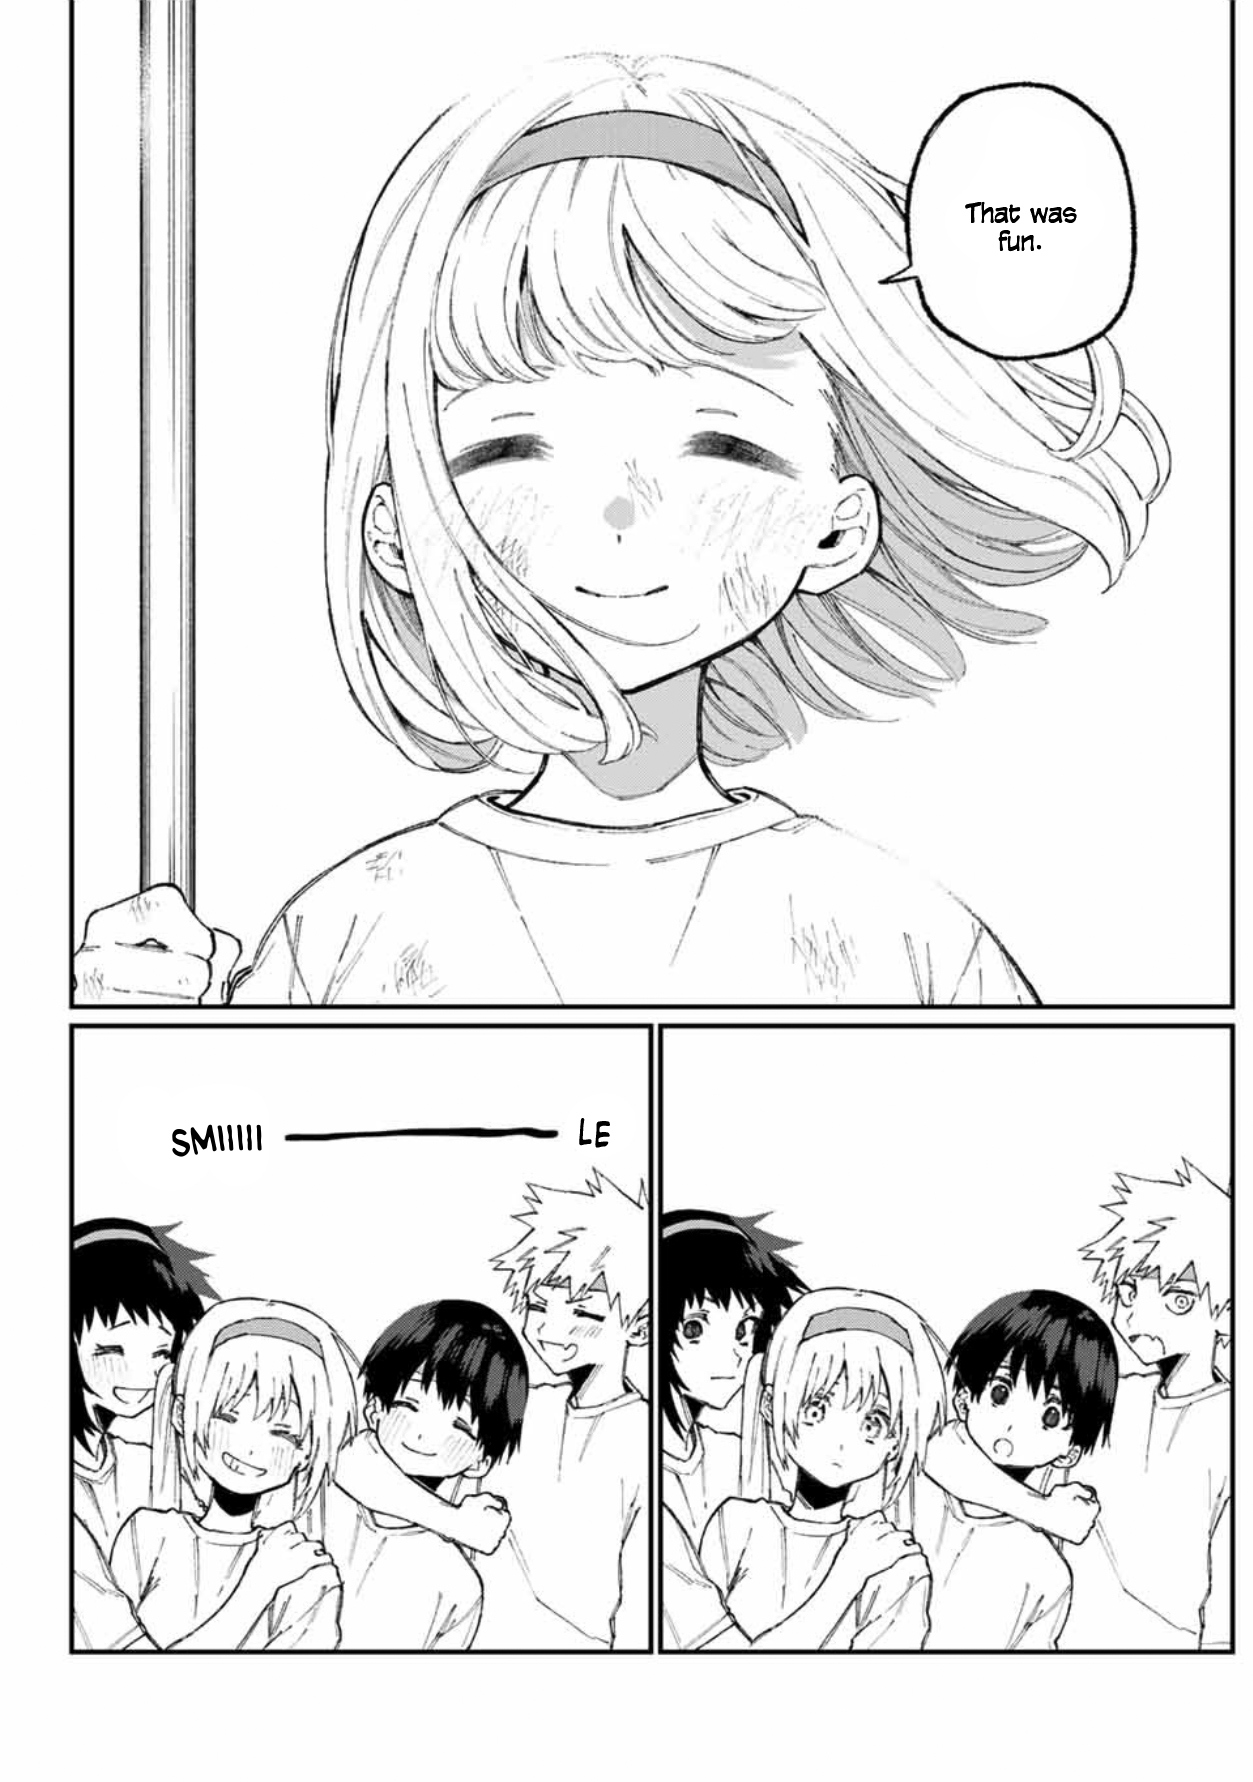 That Girl Is Not Just Cute Vol. 5 Ch. 56